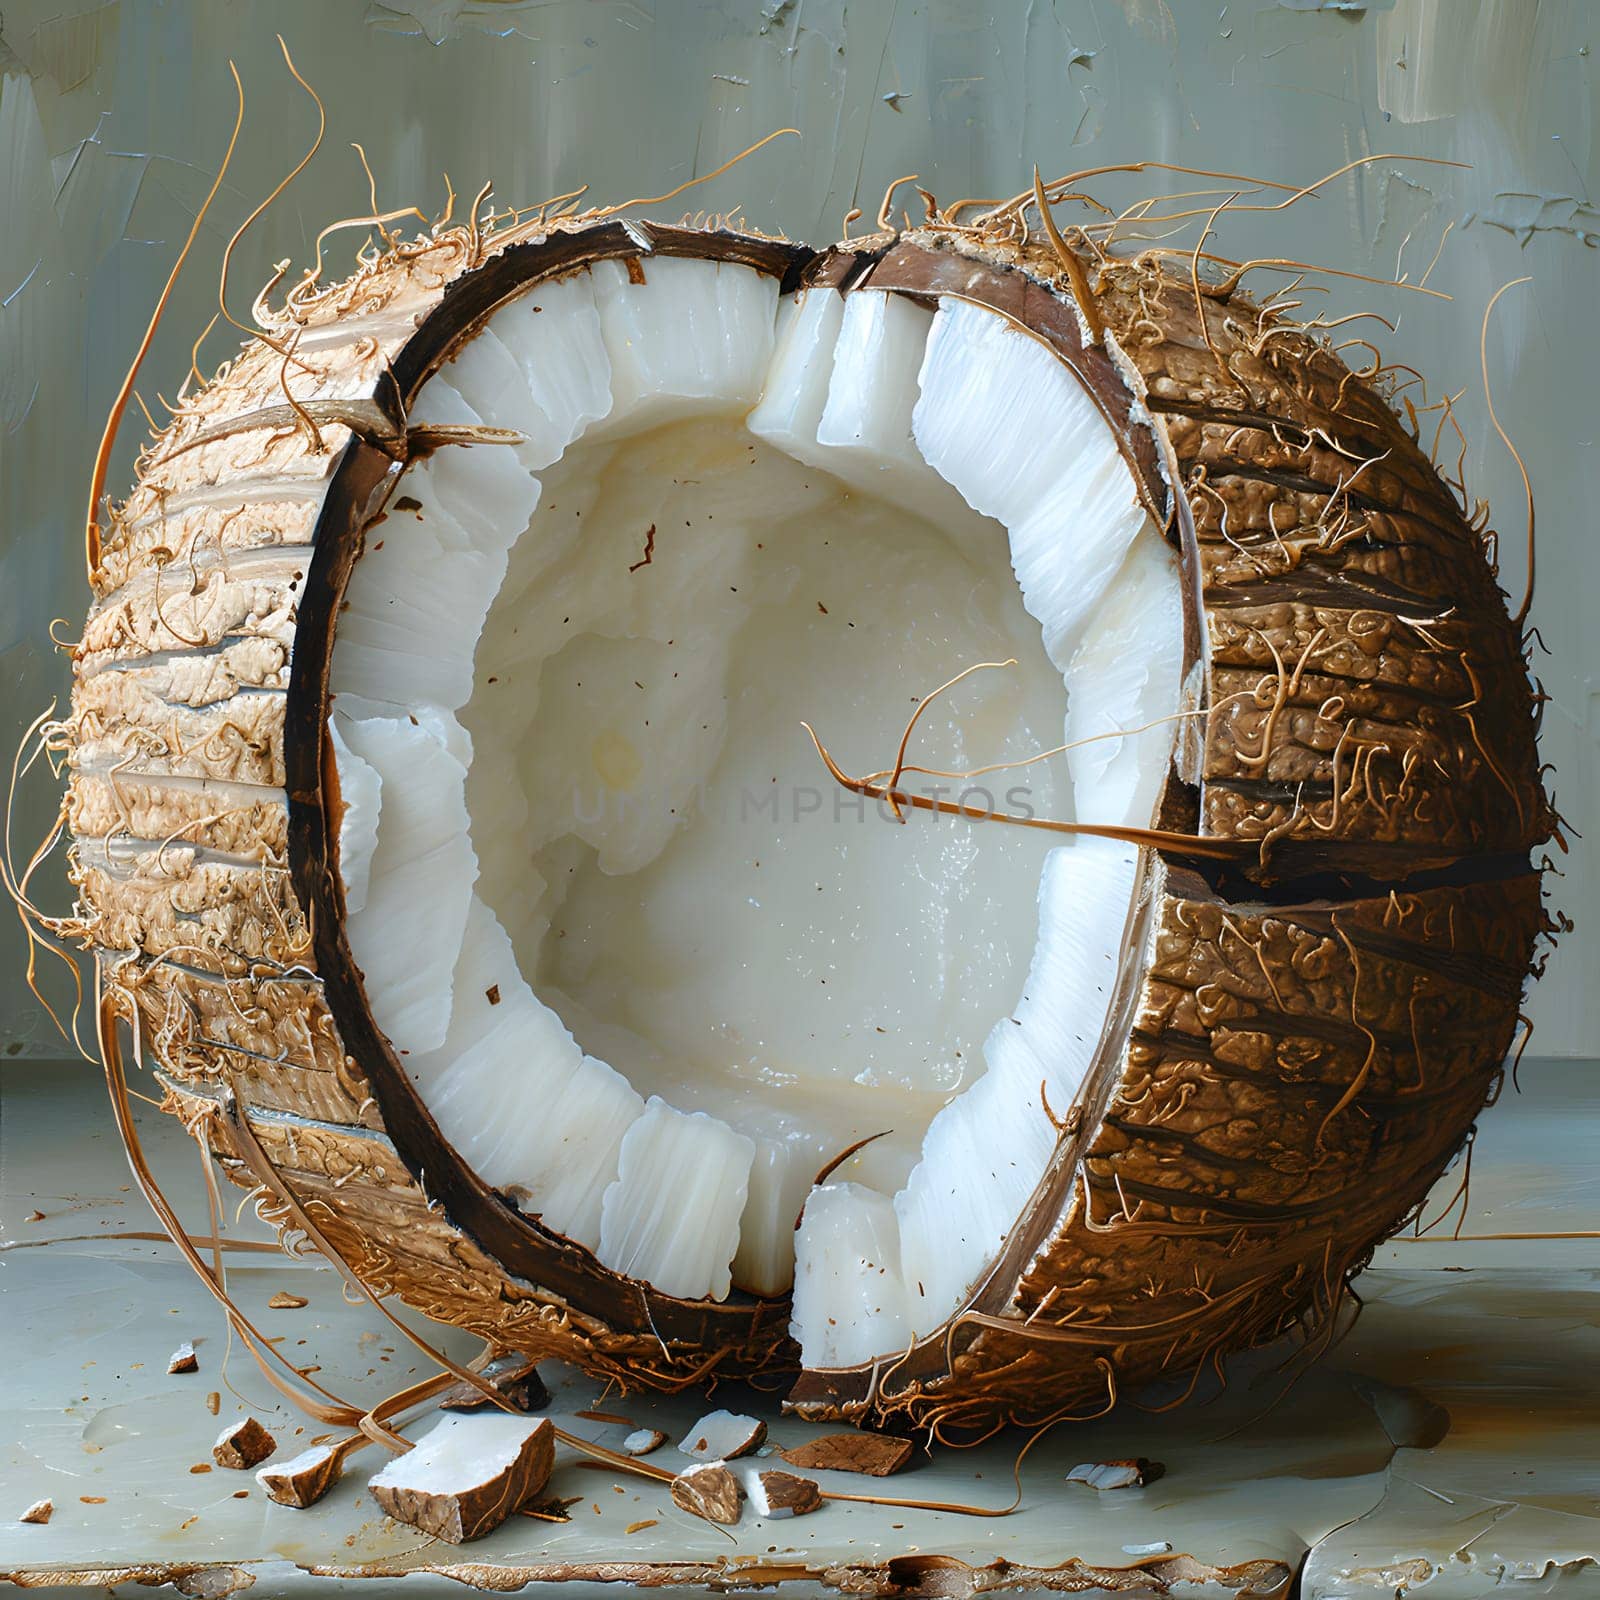 A coconut, a terrestrial plant ingredient, is halved on a wooden table. The circular fruit comes from a coconut tree and can be used in various dishes in cuisine